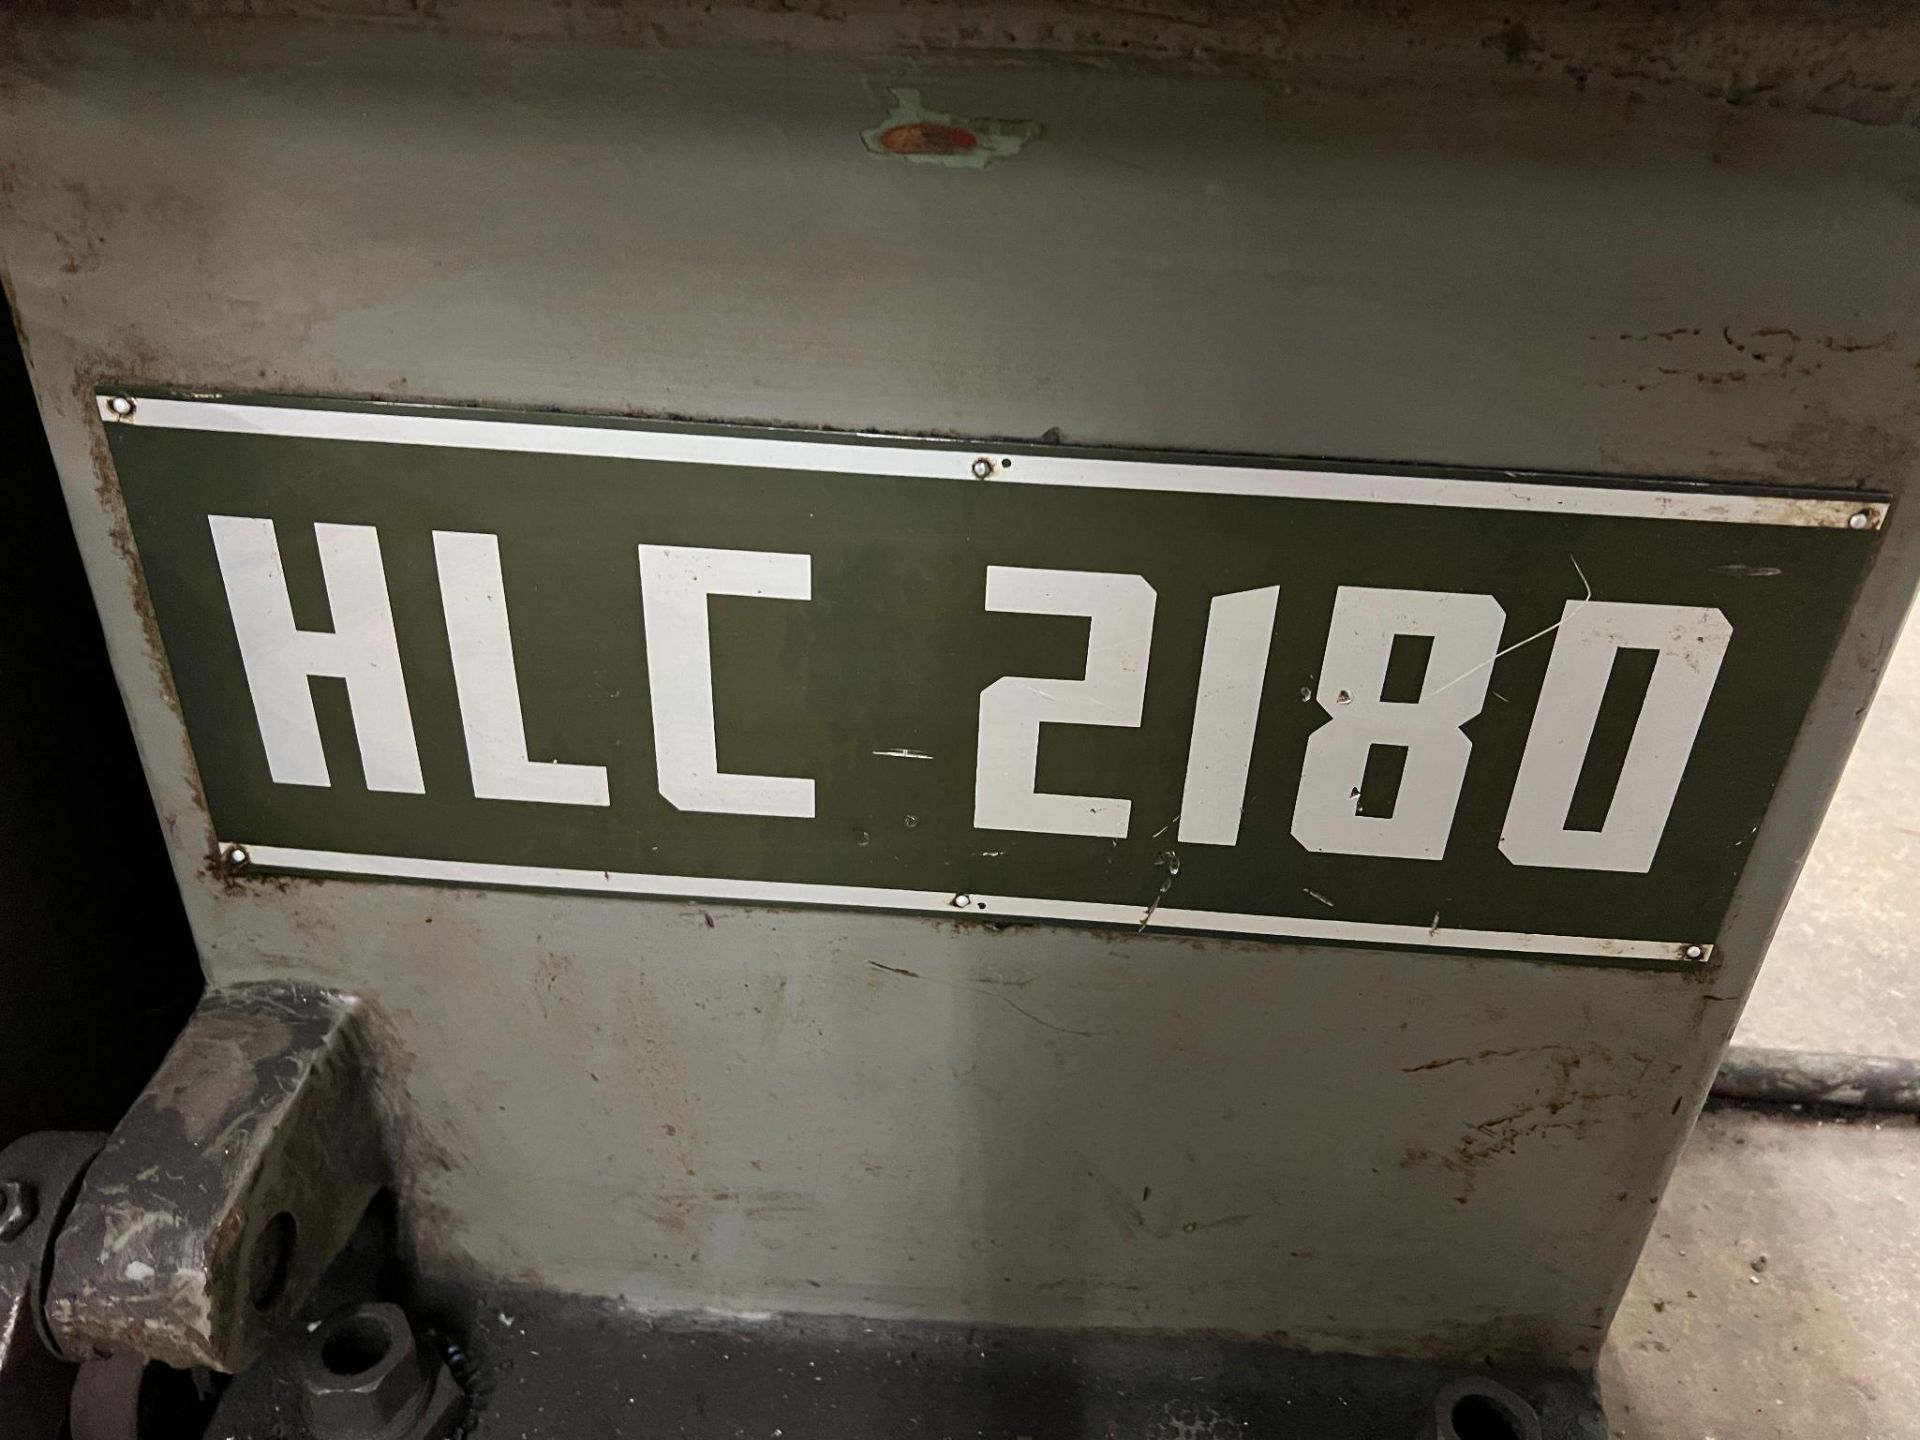 Kingston HLC-2180 (JIMK530x2000) Gap Bed Engine lathe Serial Number K3099715. 21" x 80" Swing over b - Image 18 of 21